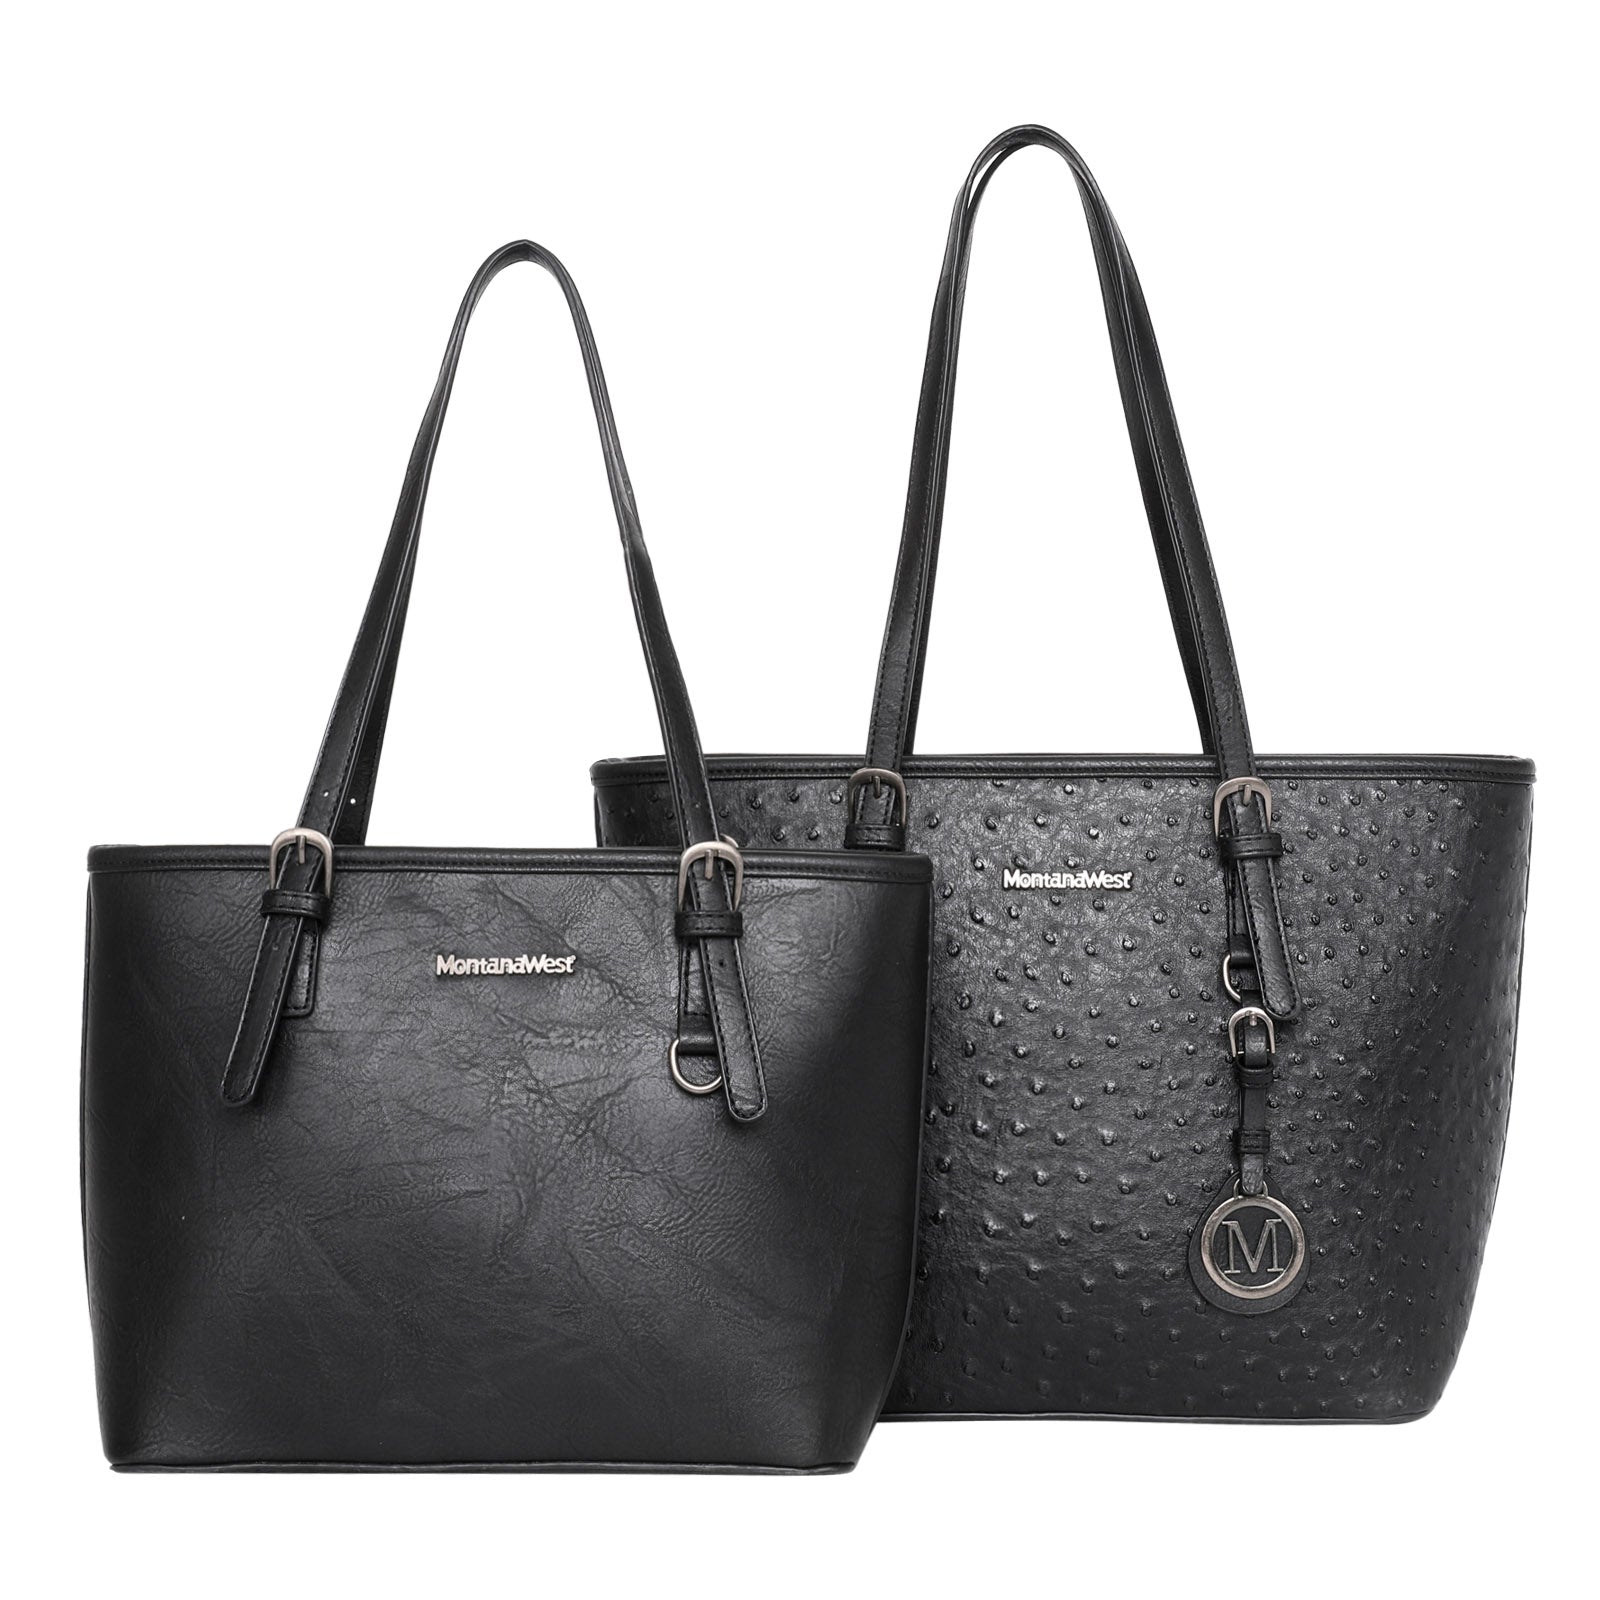 Montana West 2Pcs Set Tote (Concealed Carry Ostrich Print Tote & Small Basic Tote) - Cowgirl Wear